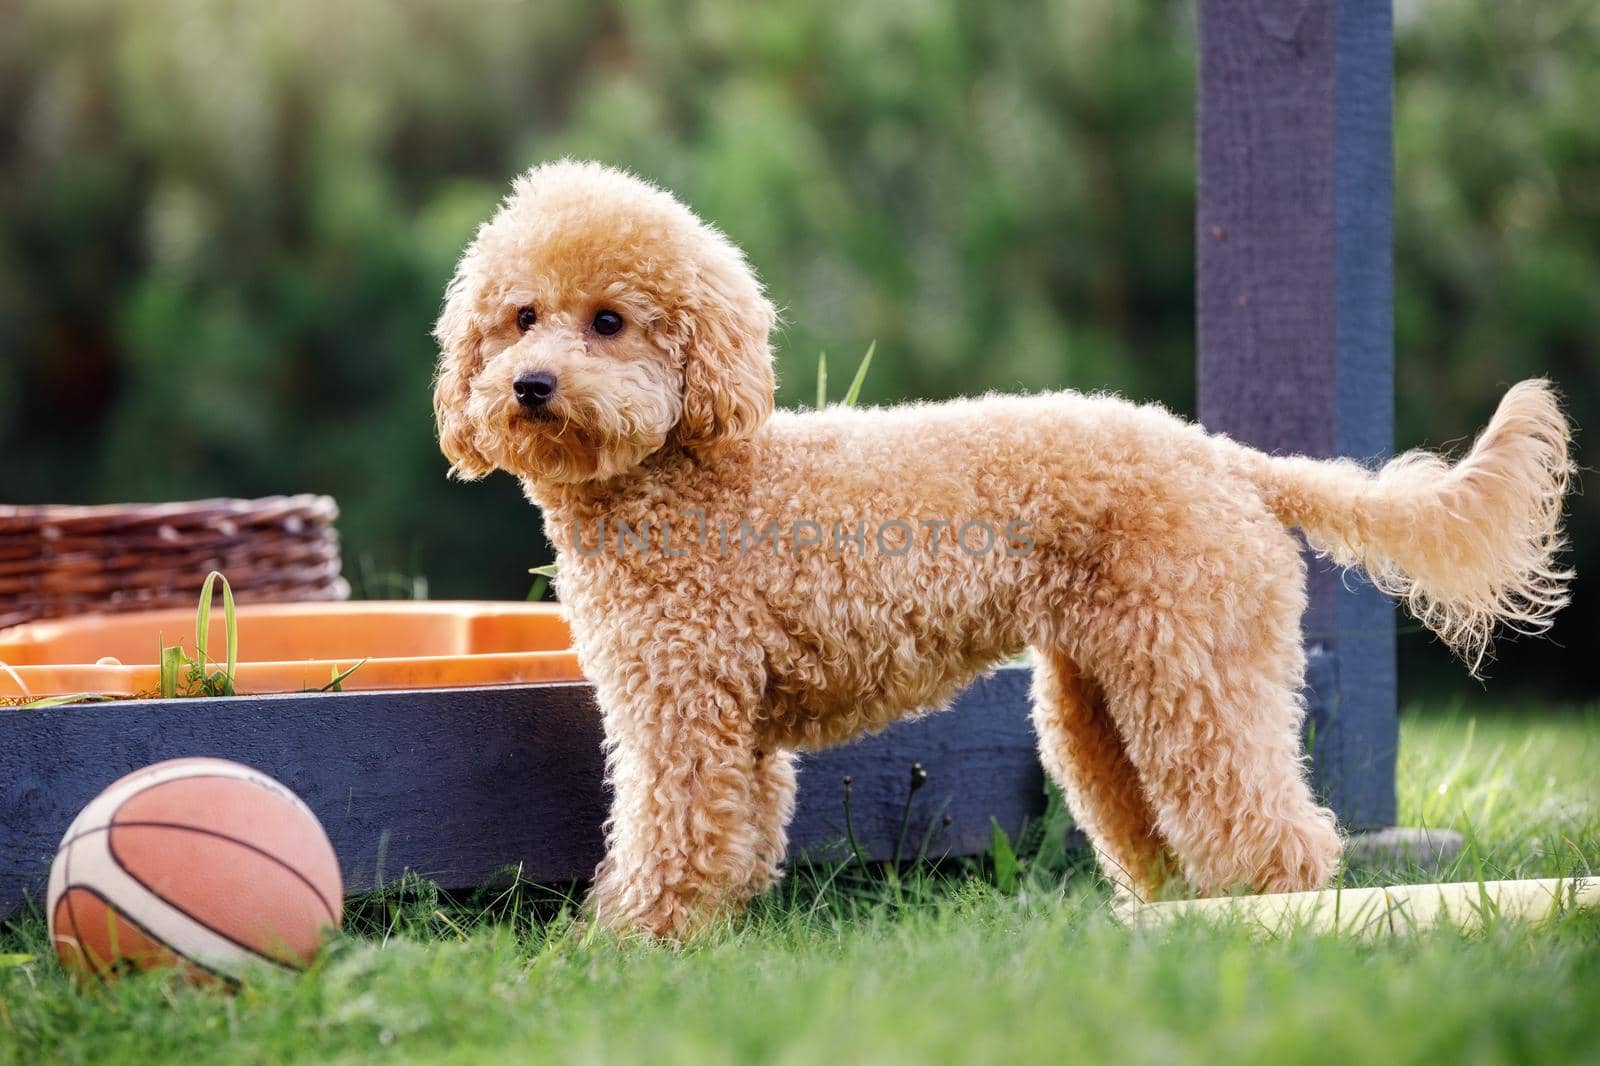 Cute small golden poodle dog and his toy rubber basketball ball by Lincikas